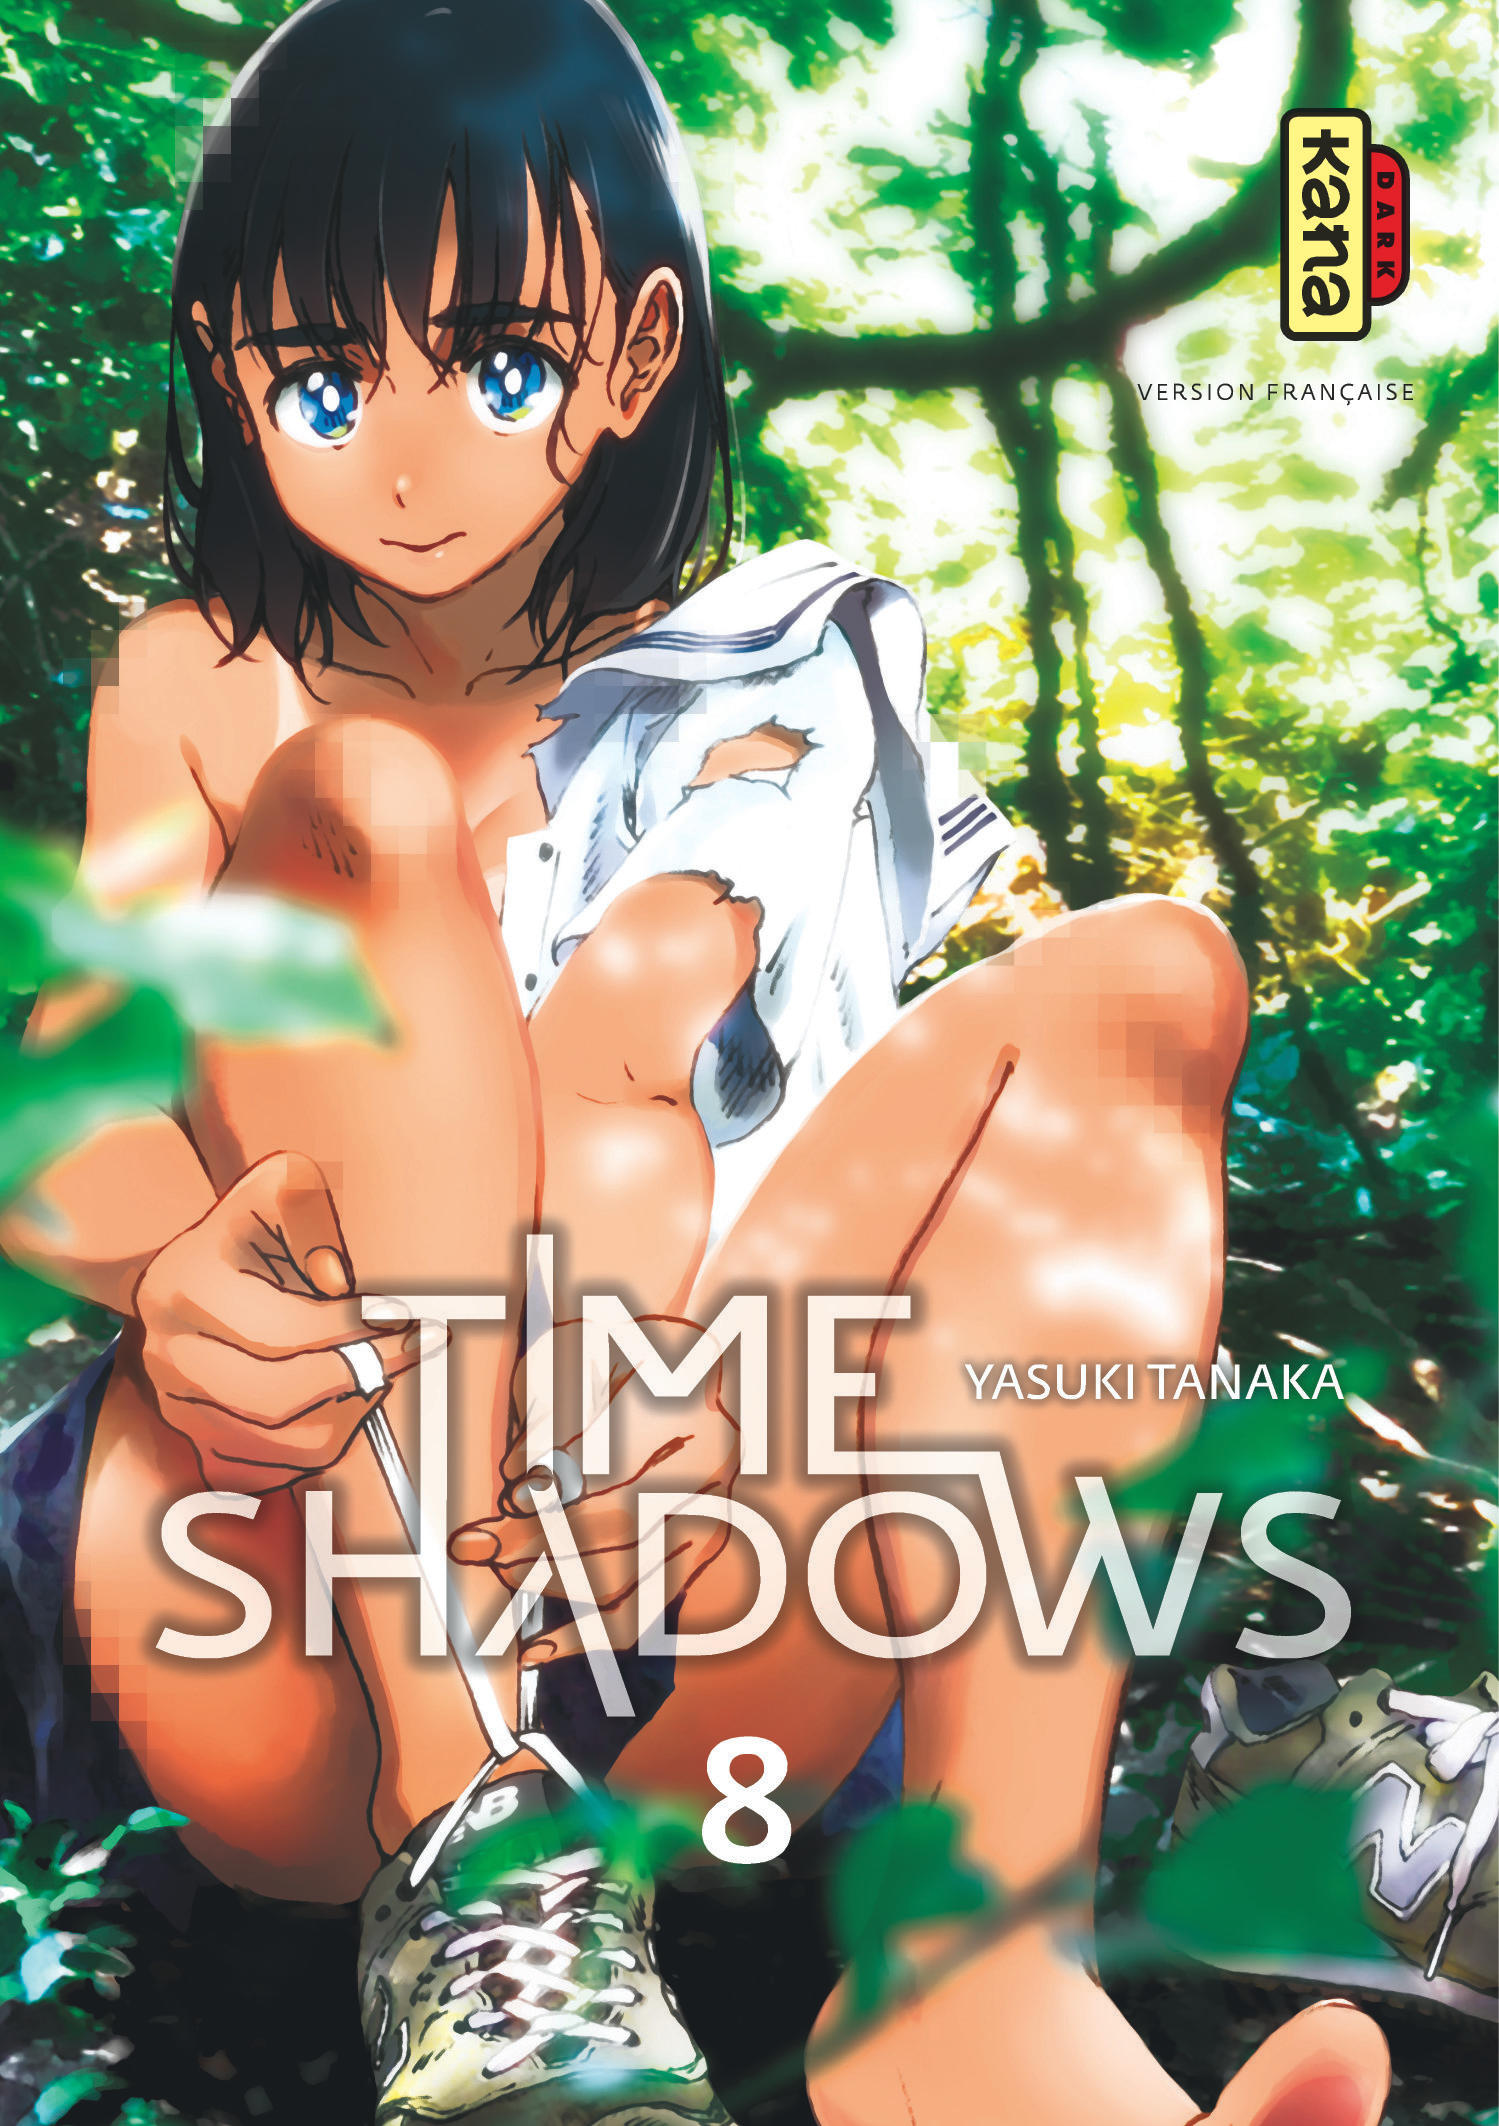 Time shadows – Tome 8 - couv